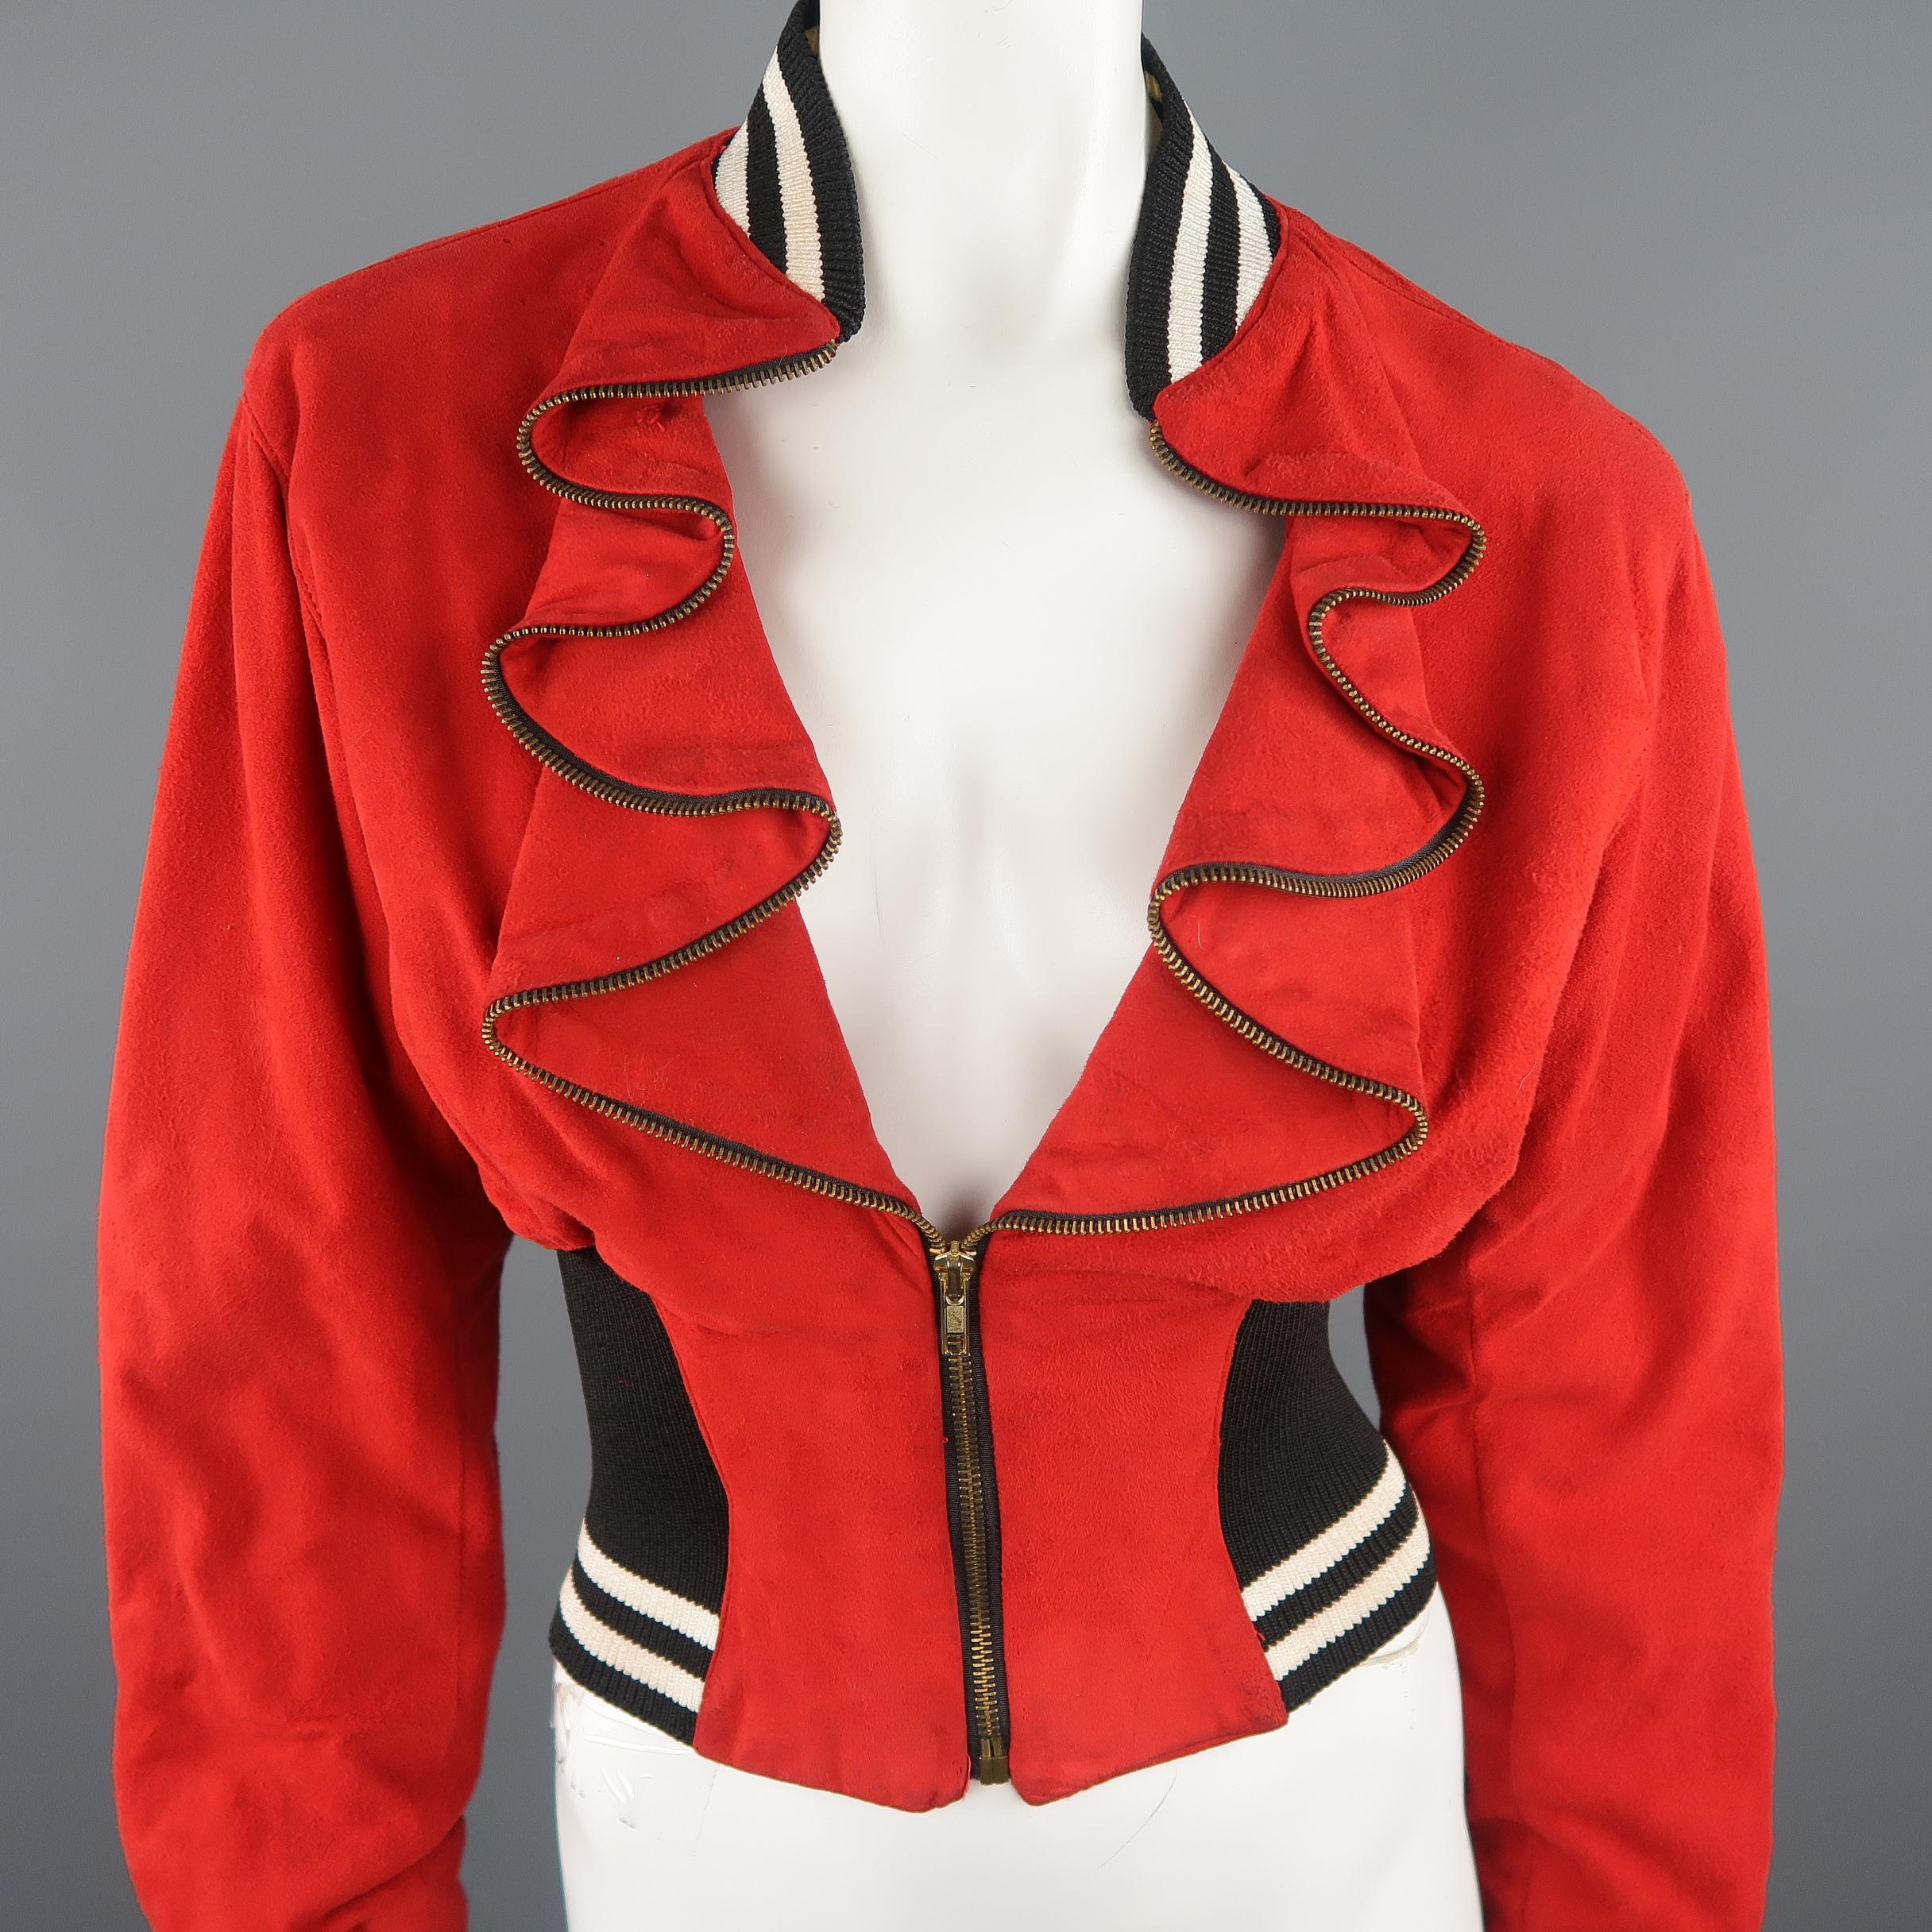 Vintage BYRON LARS circa 1990's baseball jacket comes in bold red suede with a black and white striped baseball collar, cuffs, and thick waistband, cropped hemline, and dark gold tone zip ruffled lapel and closure. Vintage / Minor wear. Made in